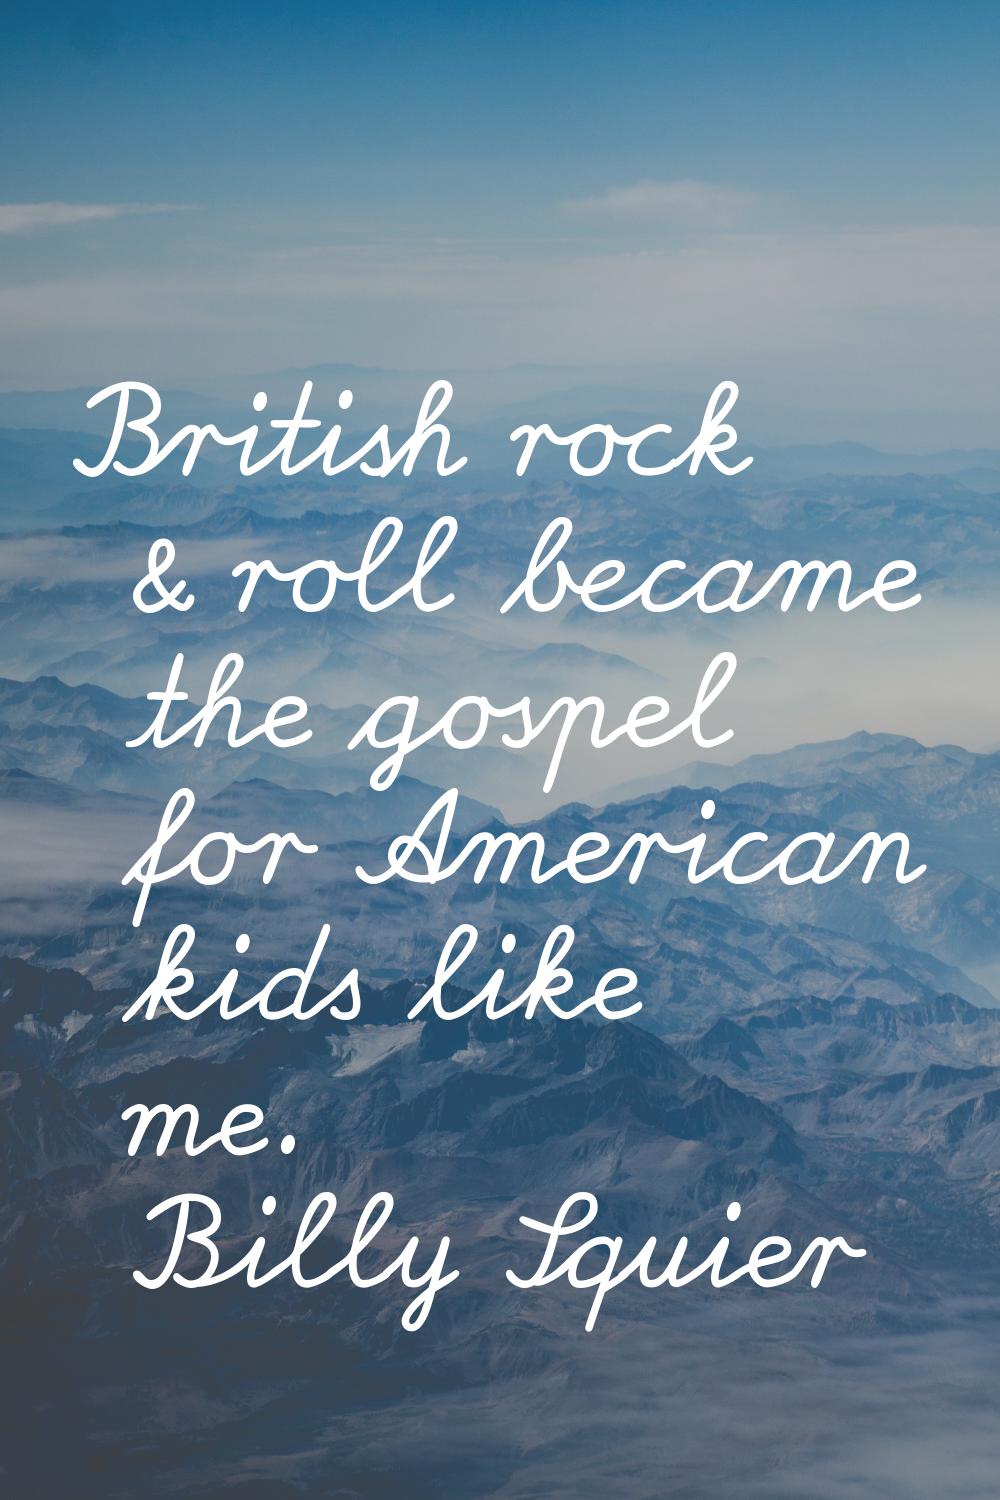 British rock & roll became the gospel for American kids like me.